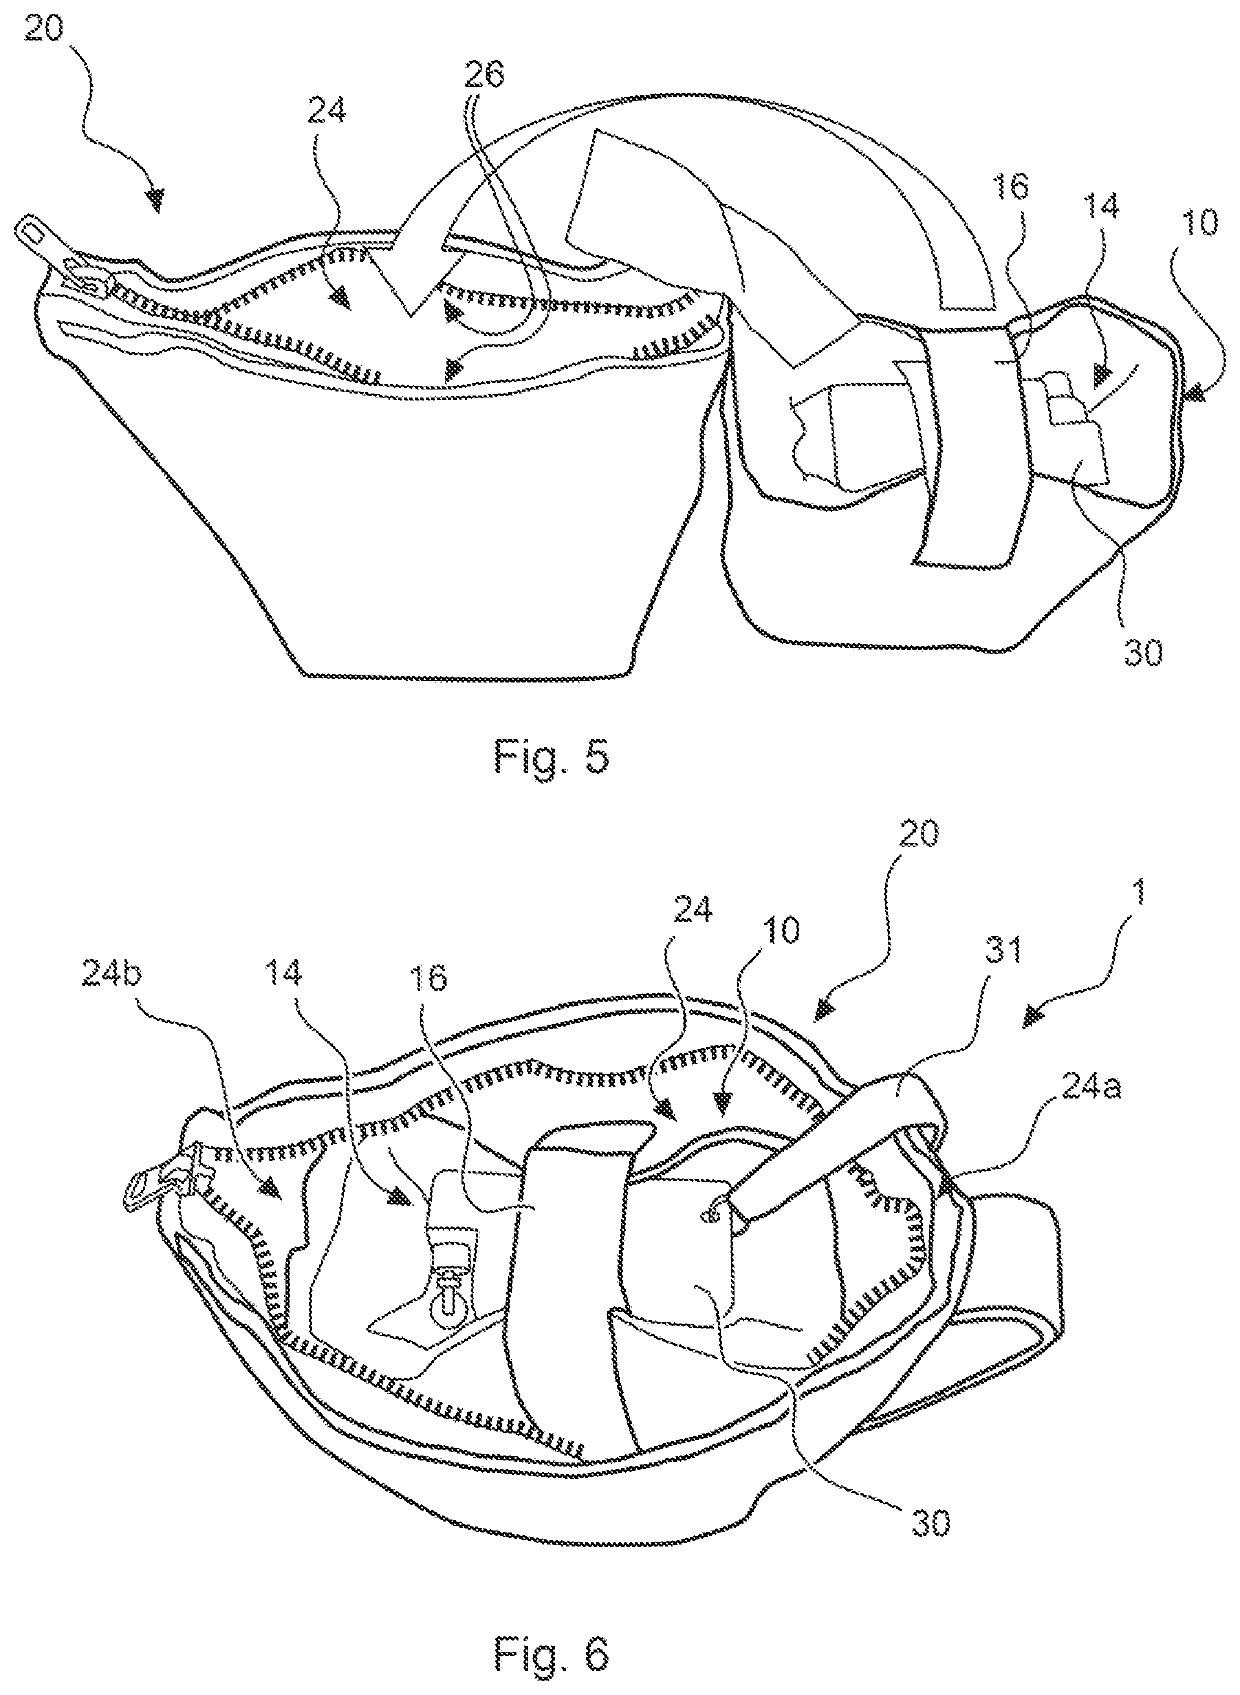 Storage System Having Two Pouches